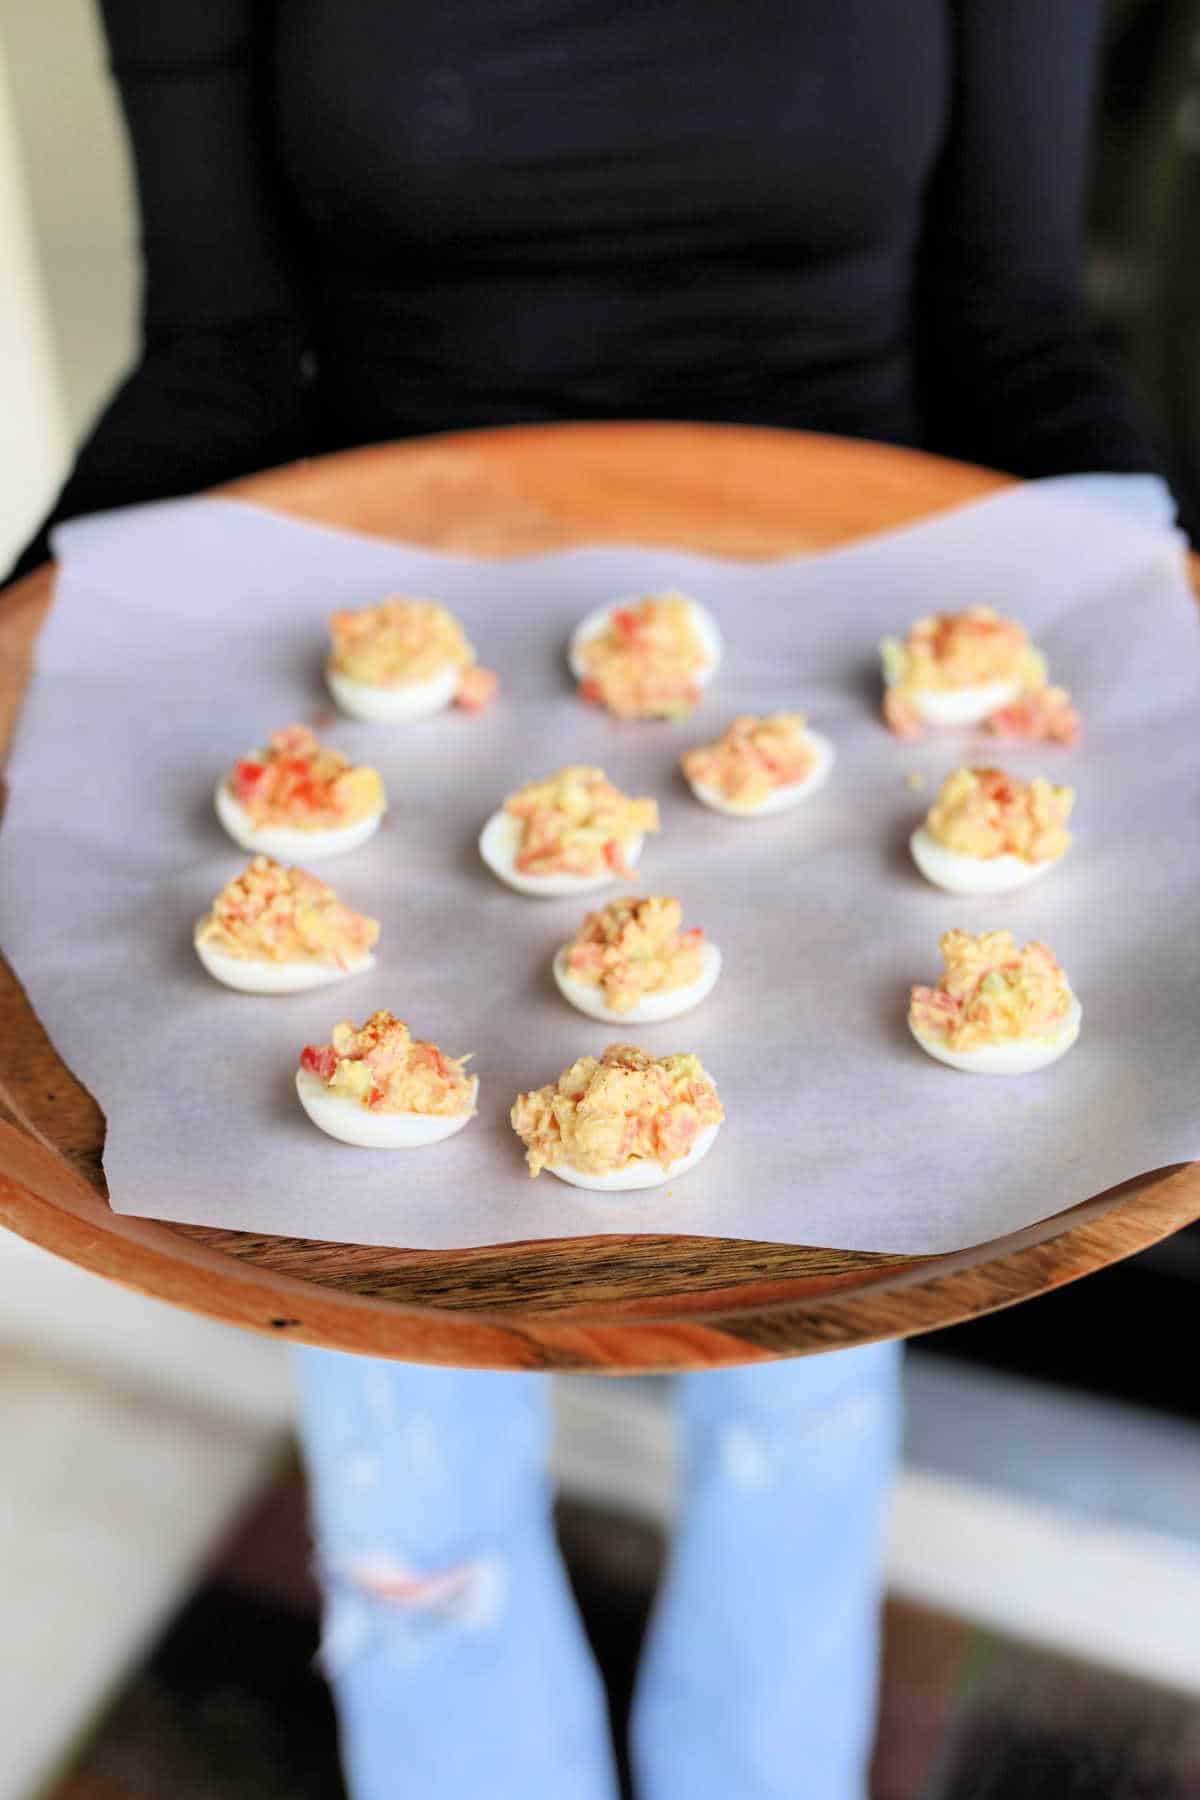 Deviled eggs with shrimp stuffed in a hard boiled egg on a serving wood tray.